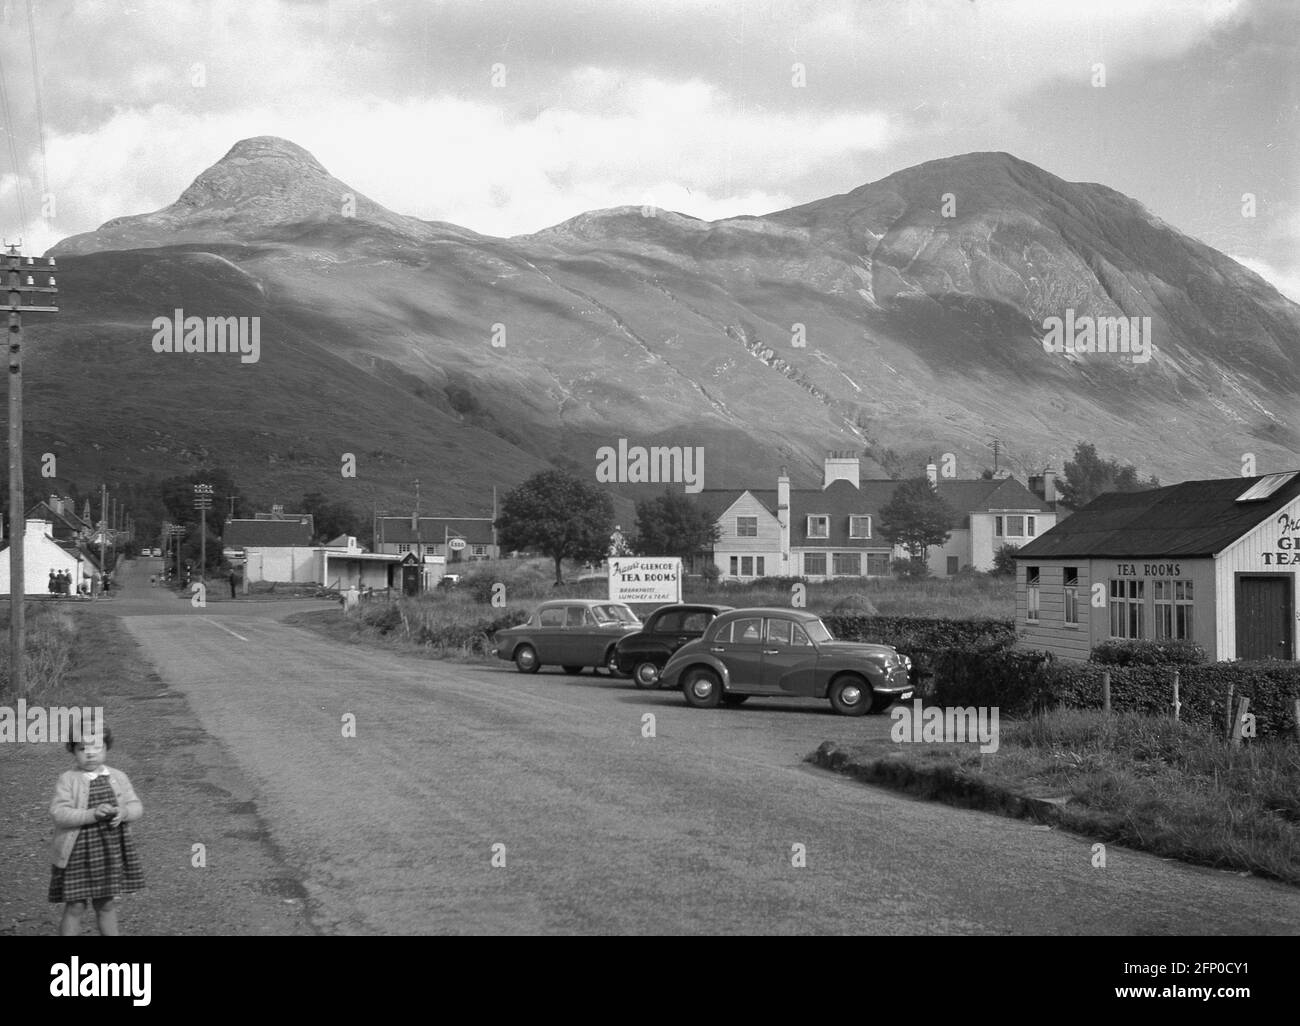 1960, historical, cars of the era parked outside Fraser's Tea rooms in the village of Glencoe, Highlands, Scotland, UK with the scottish mountains of Pap of Glenccoe in the background. Glen Coe is one of Scotland's most famous Highland glens and is known as the gateway to the Highlands. Stock Photo